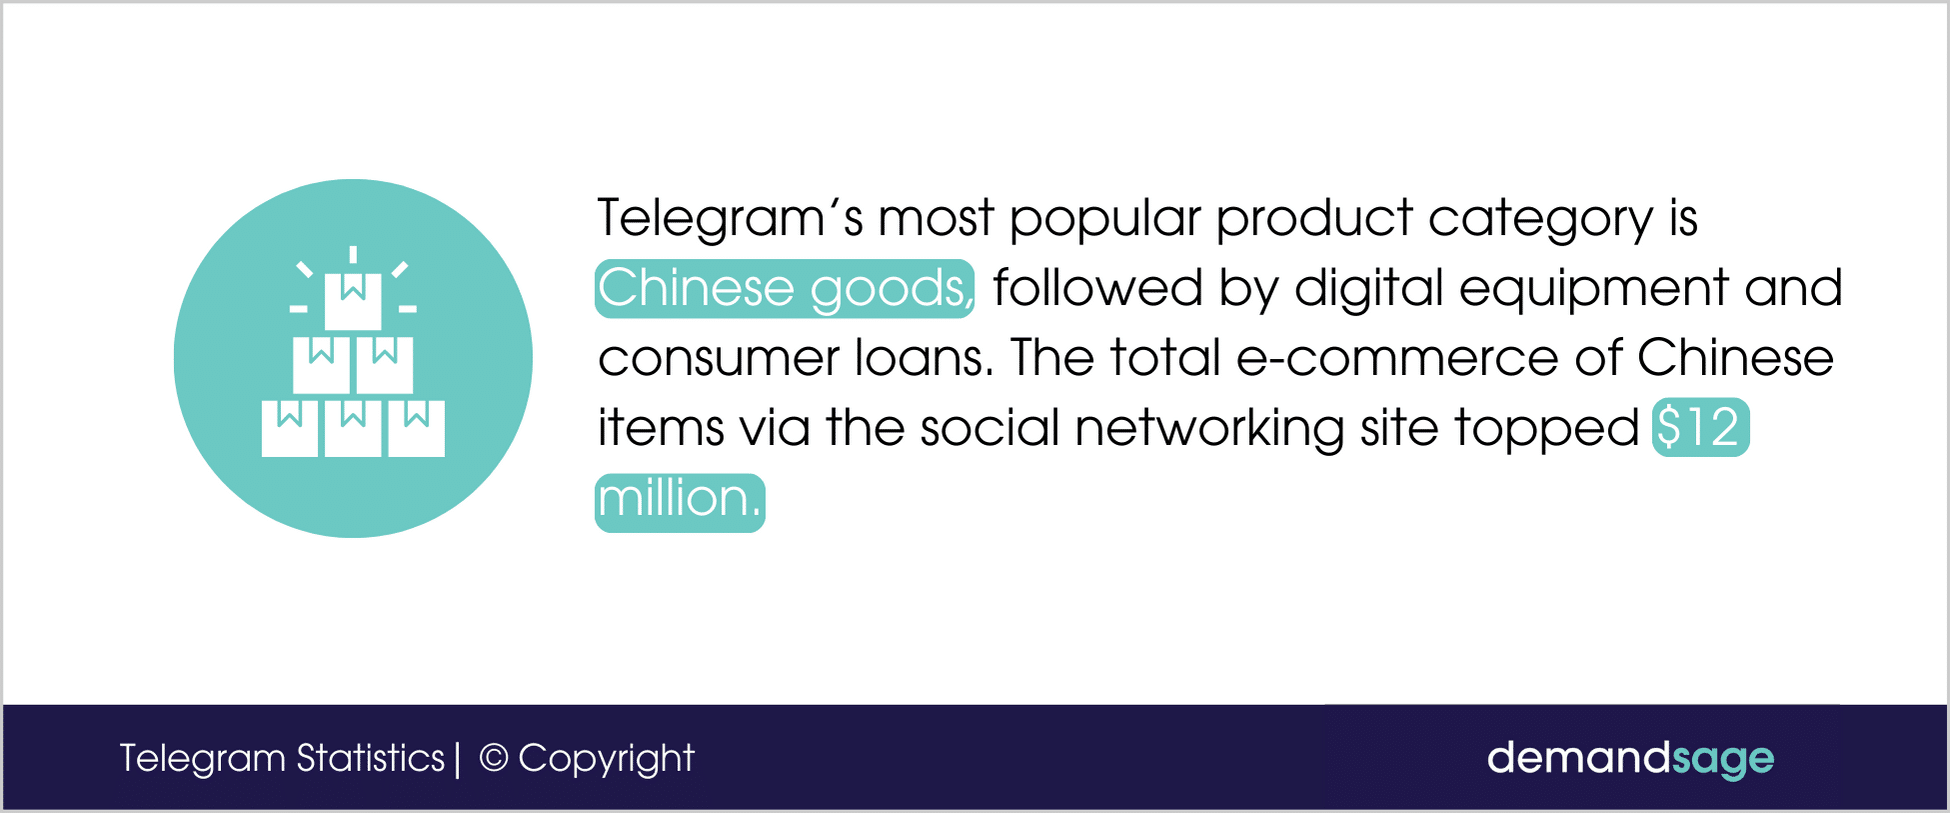 Telegram’s most popular product category is Chinese goods